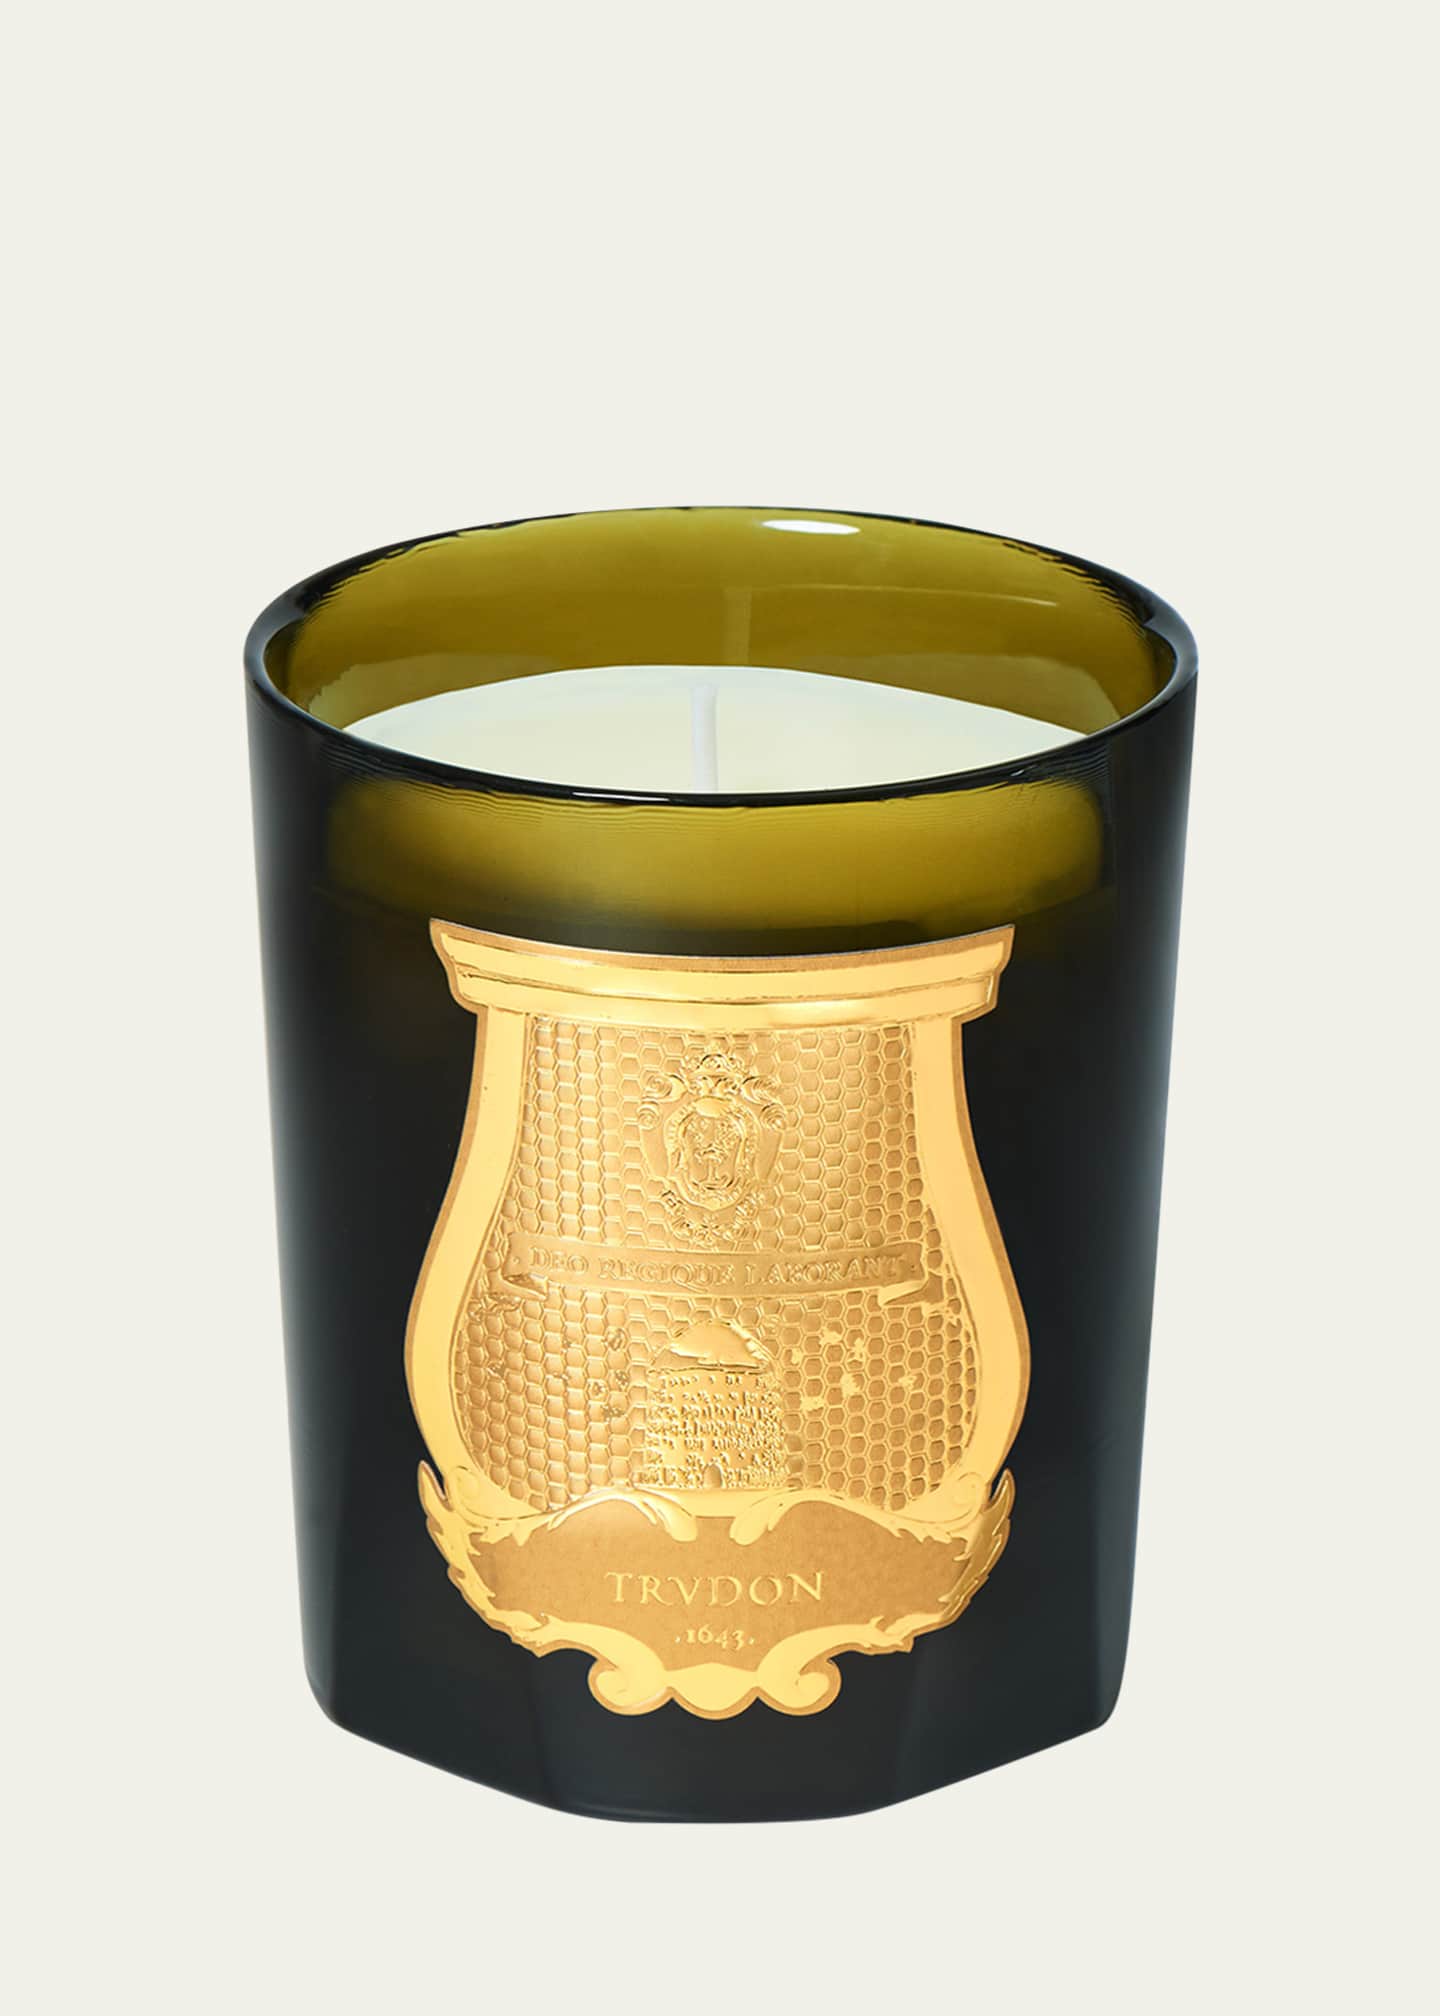 Trudon Madeleine Classic Candle, Floral Leather - Bergdorf Goodman